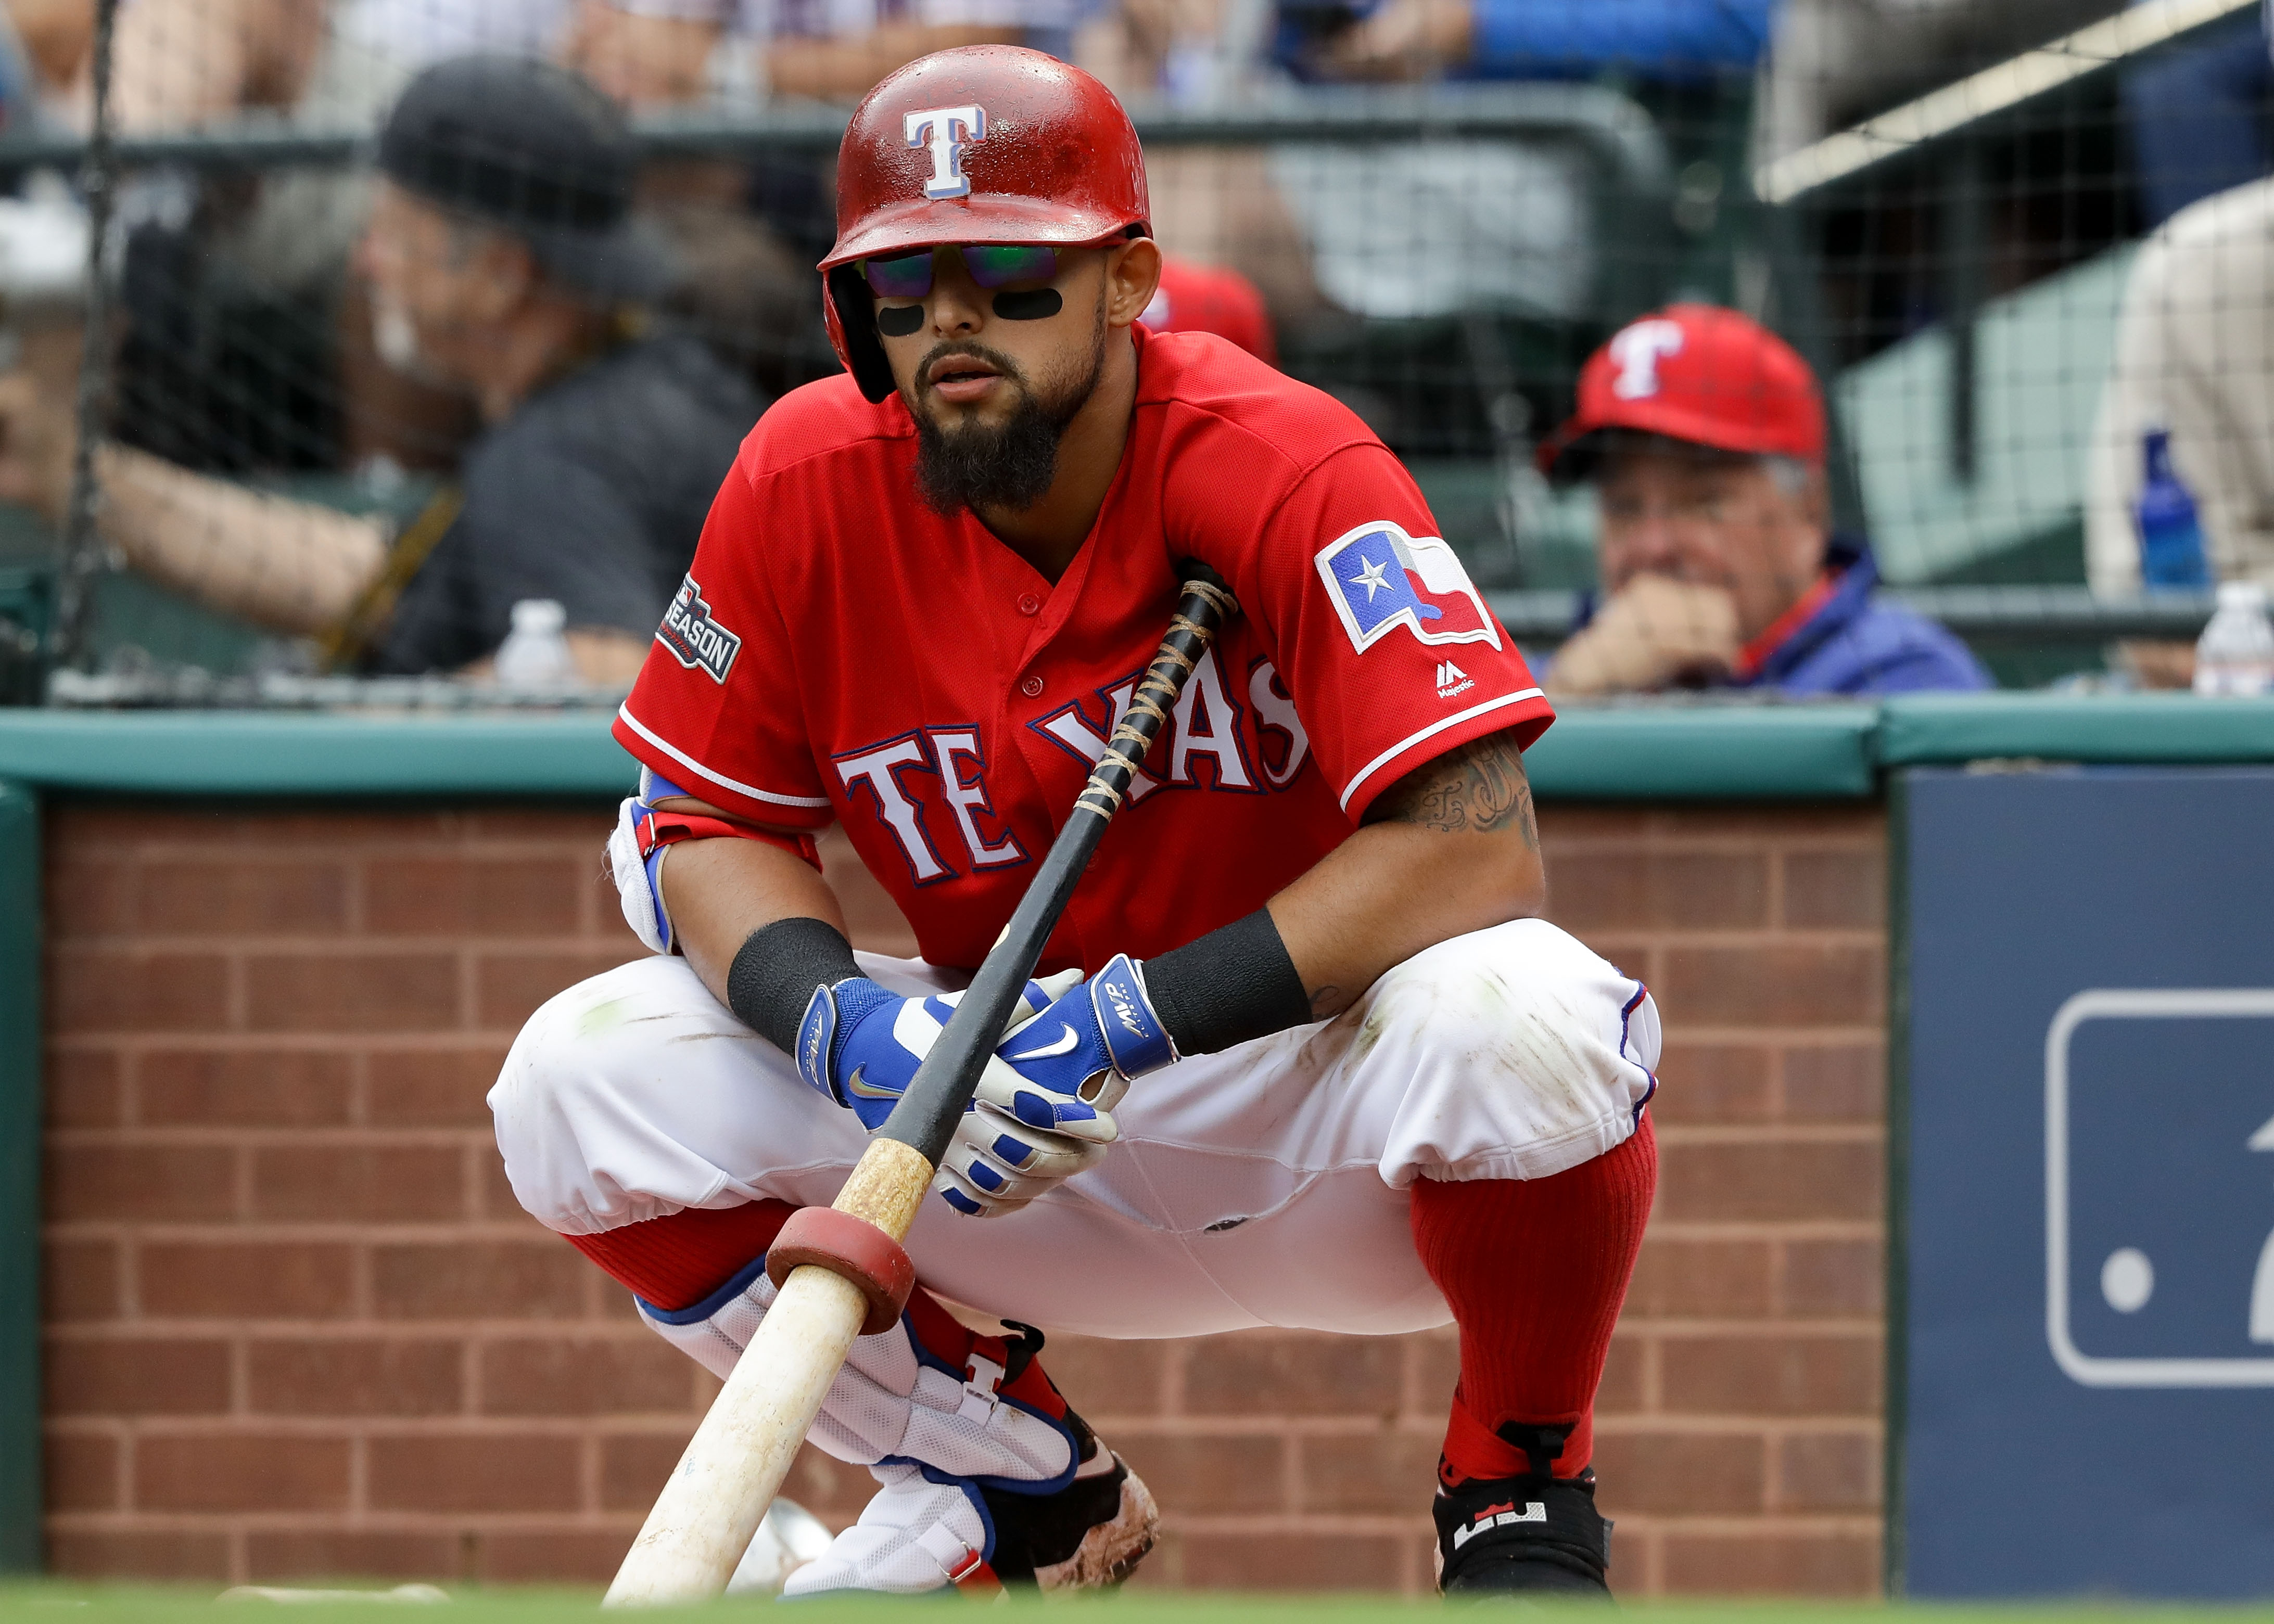 Rougned Odor’s 2016 Performance Was Awfully Unique